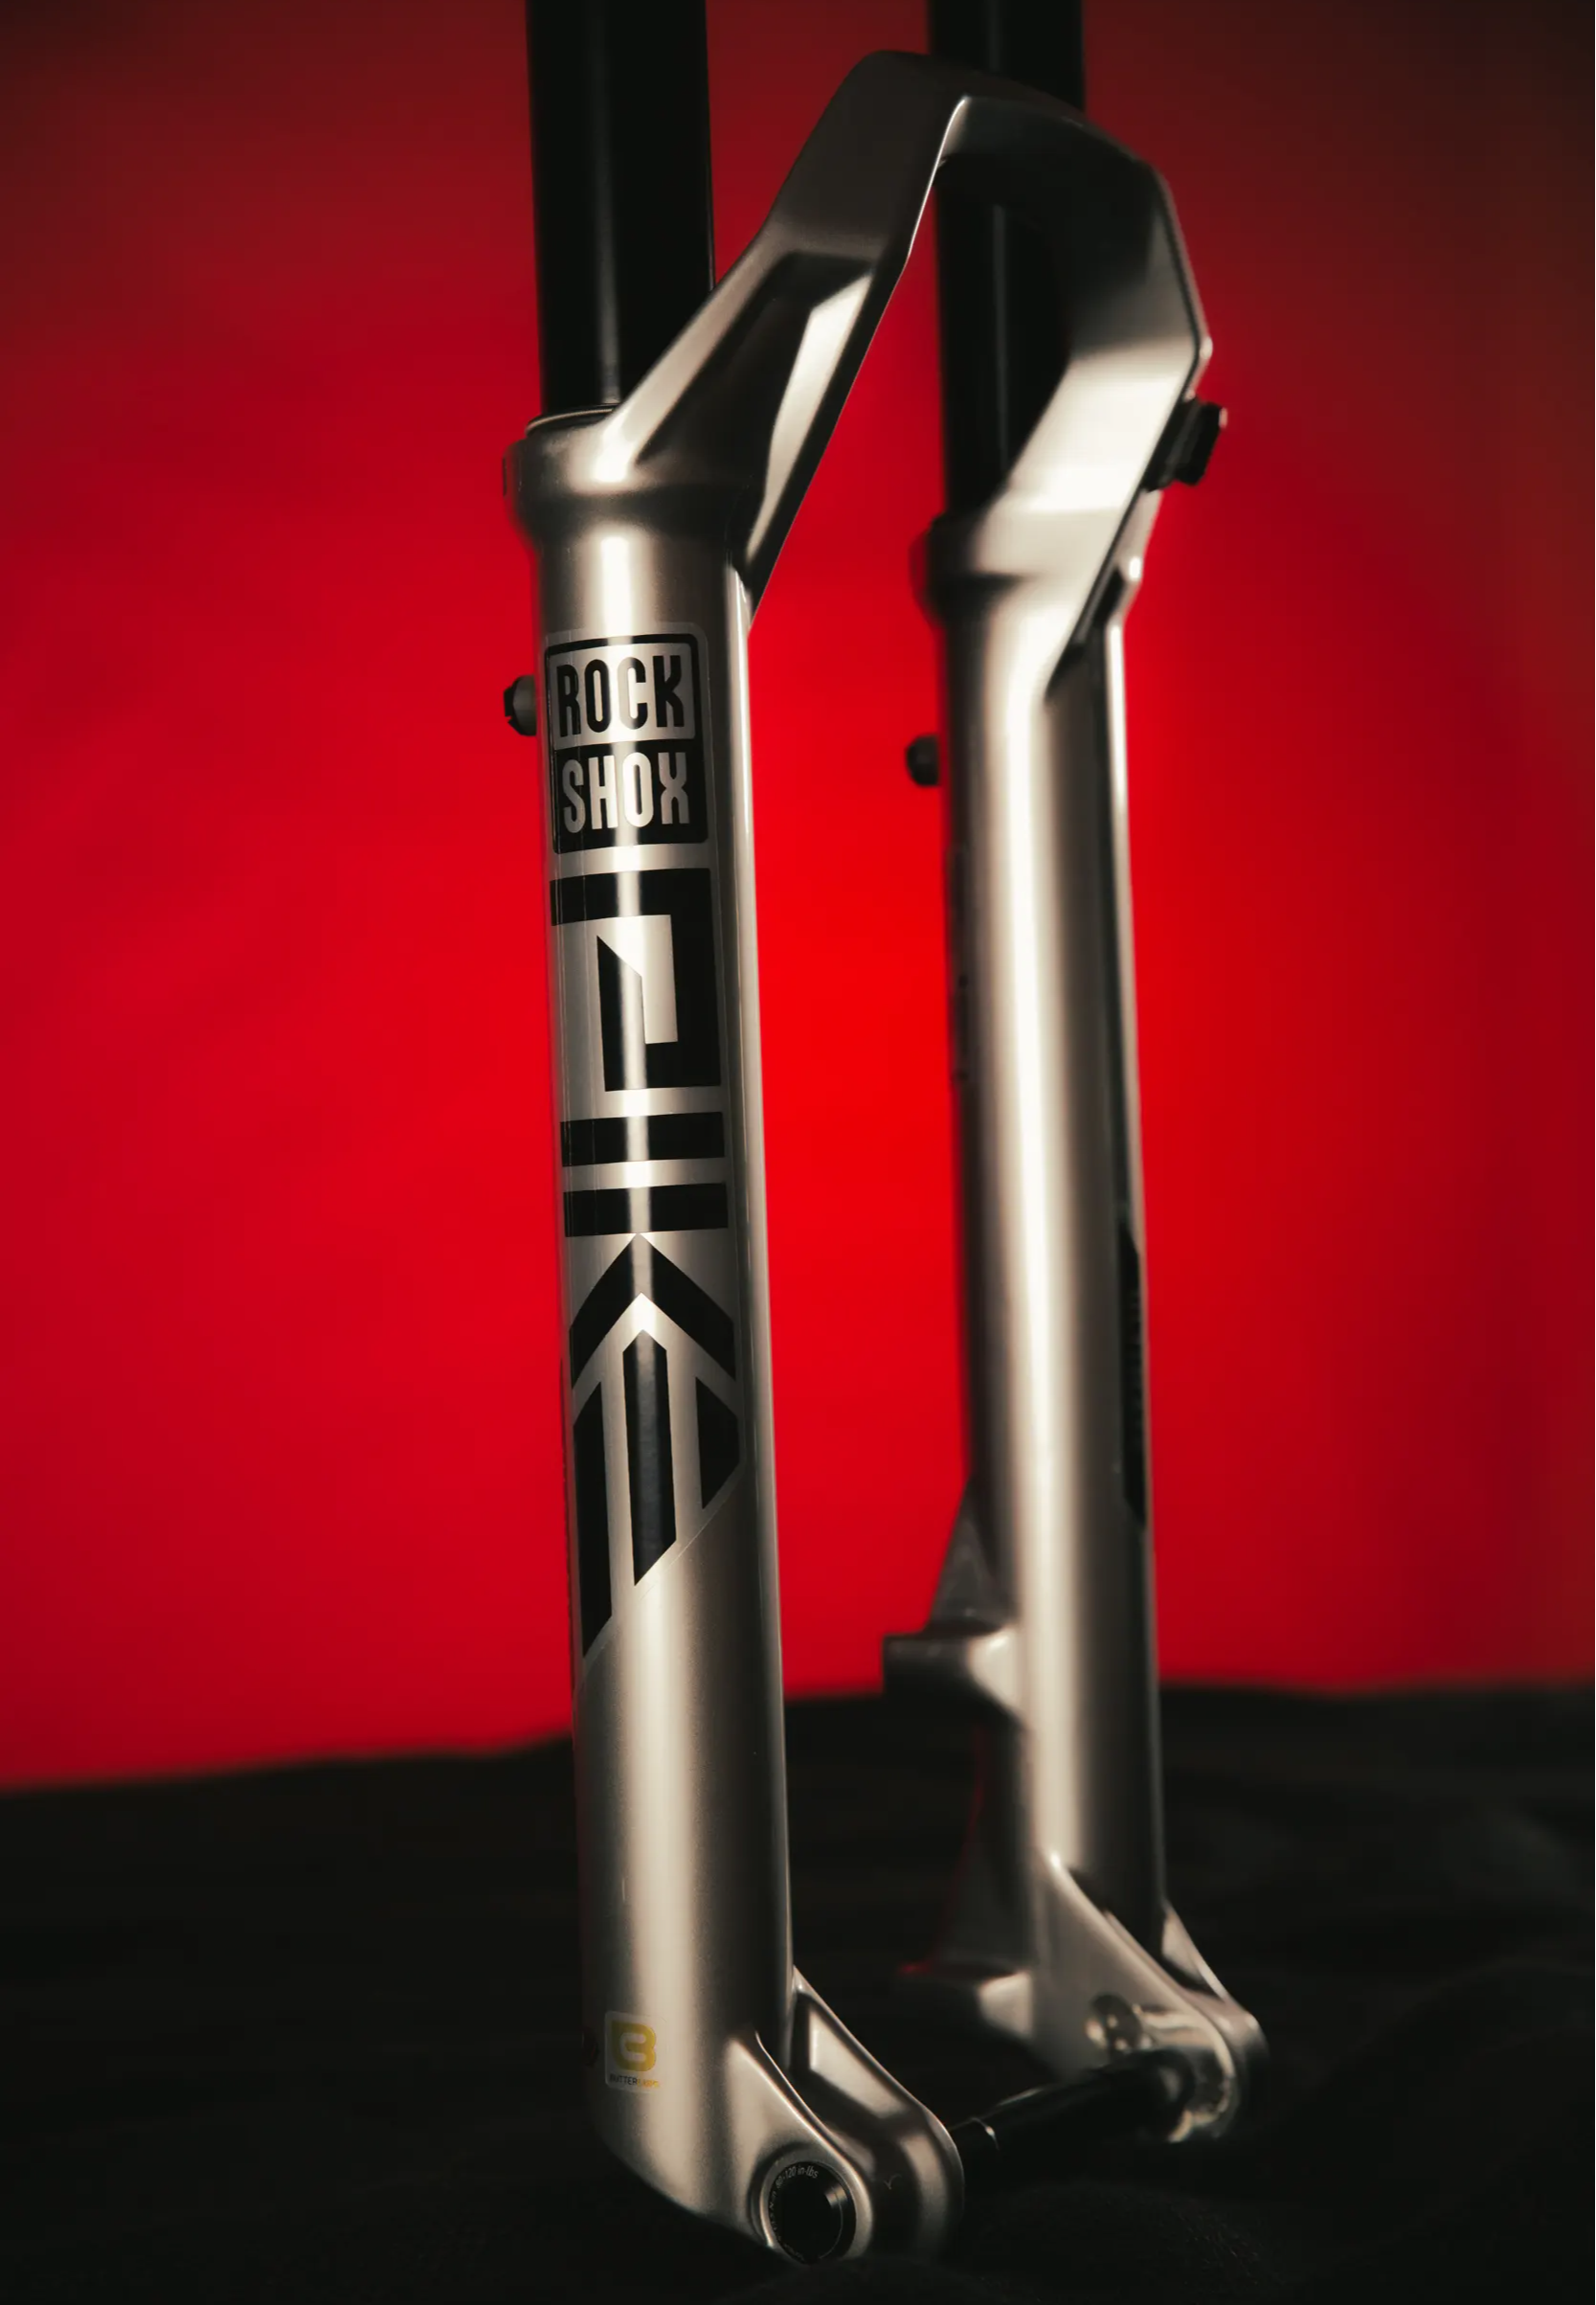 rockshox pike ultimate mountain bike fork in silver on a red and black background